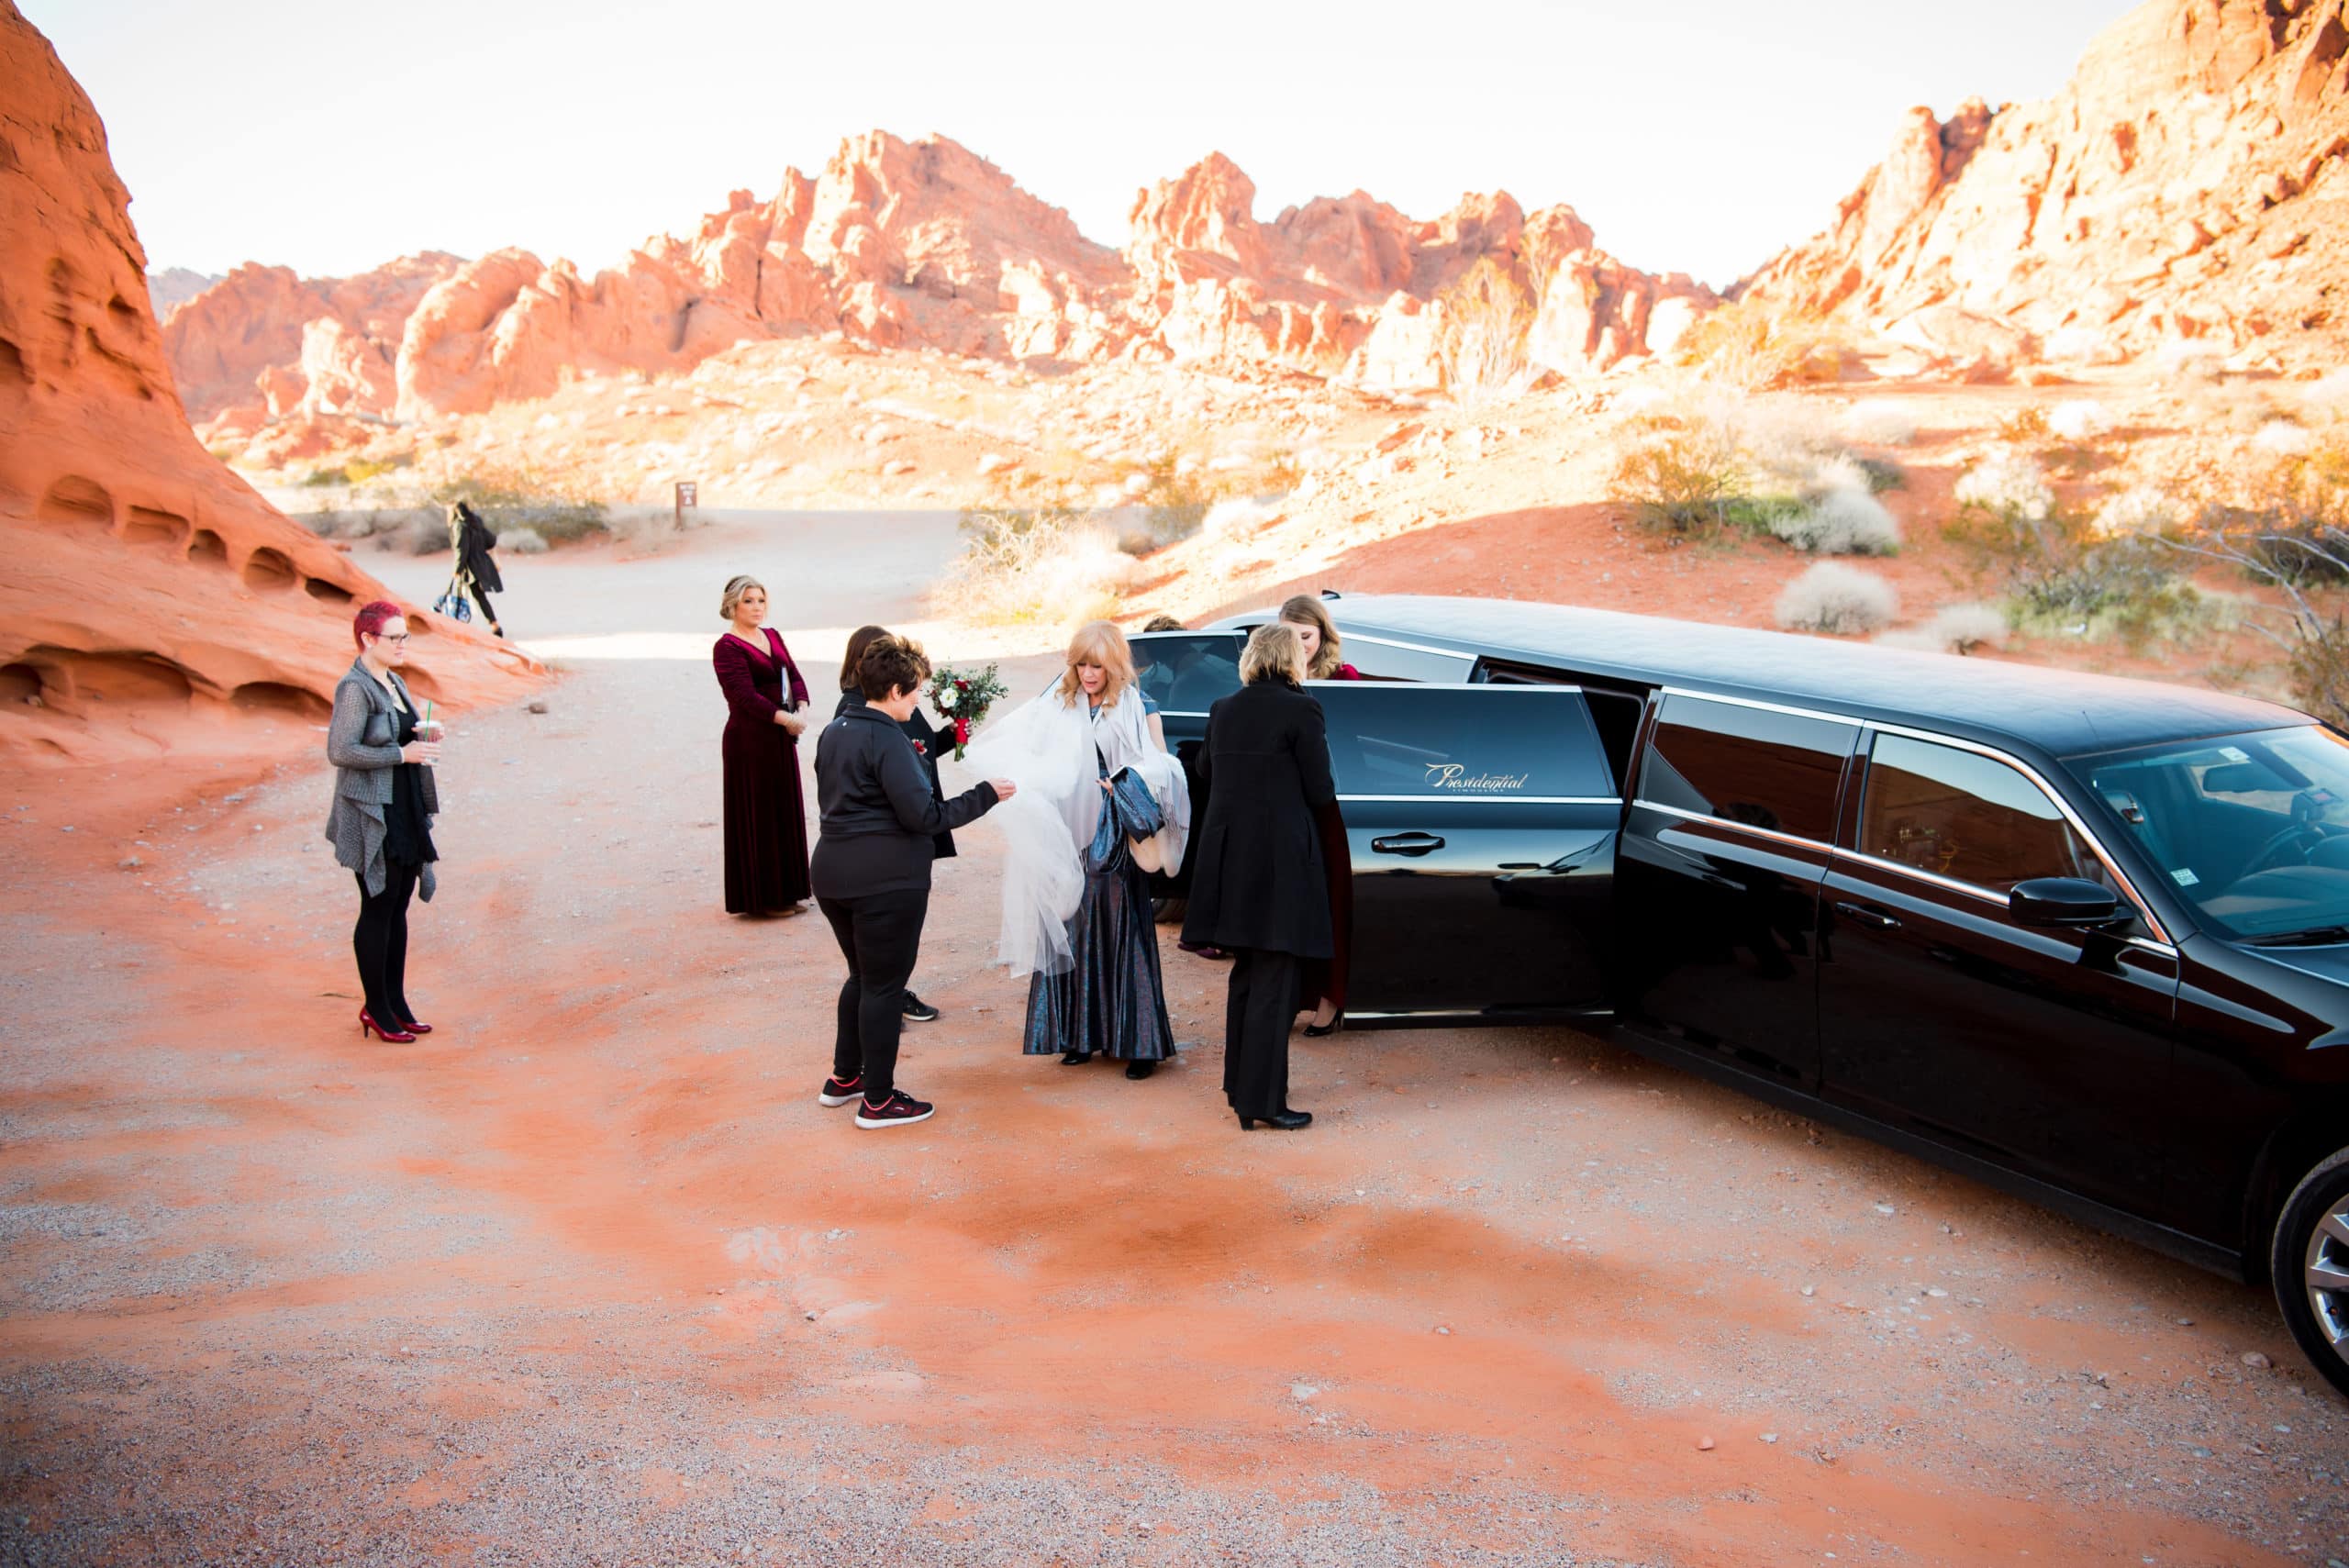 Wedding Transportation: the overlooked detail